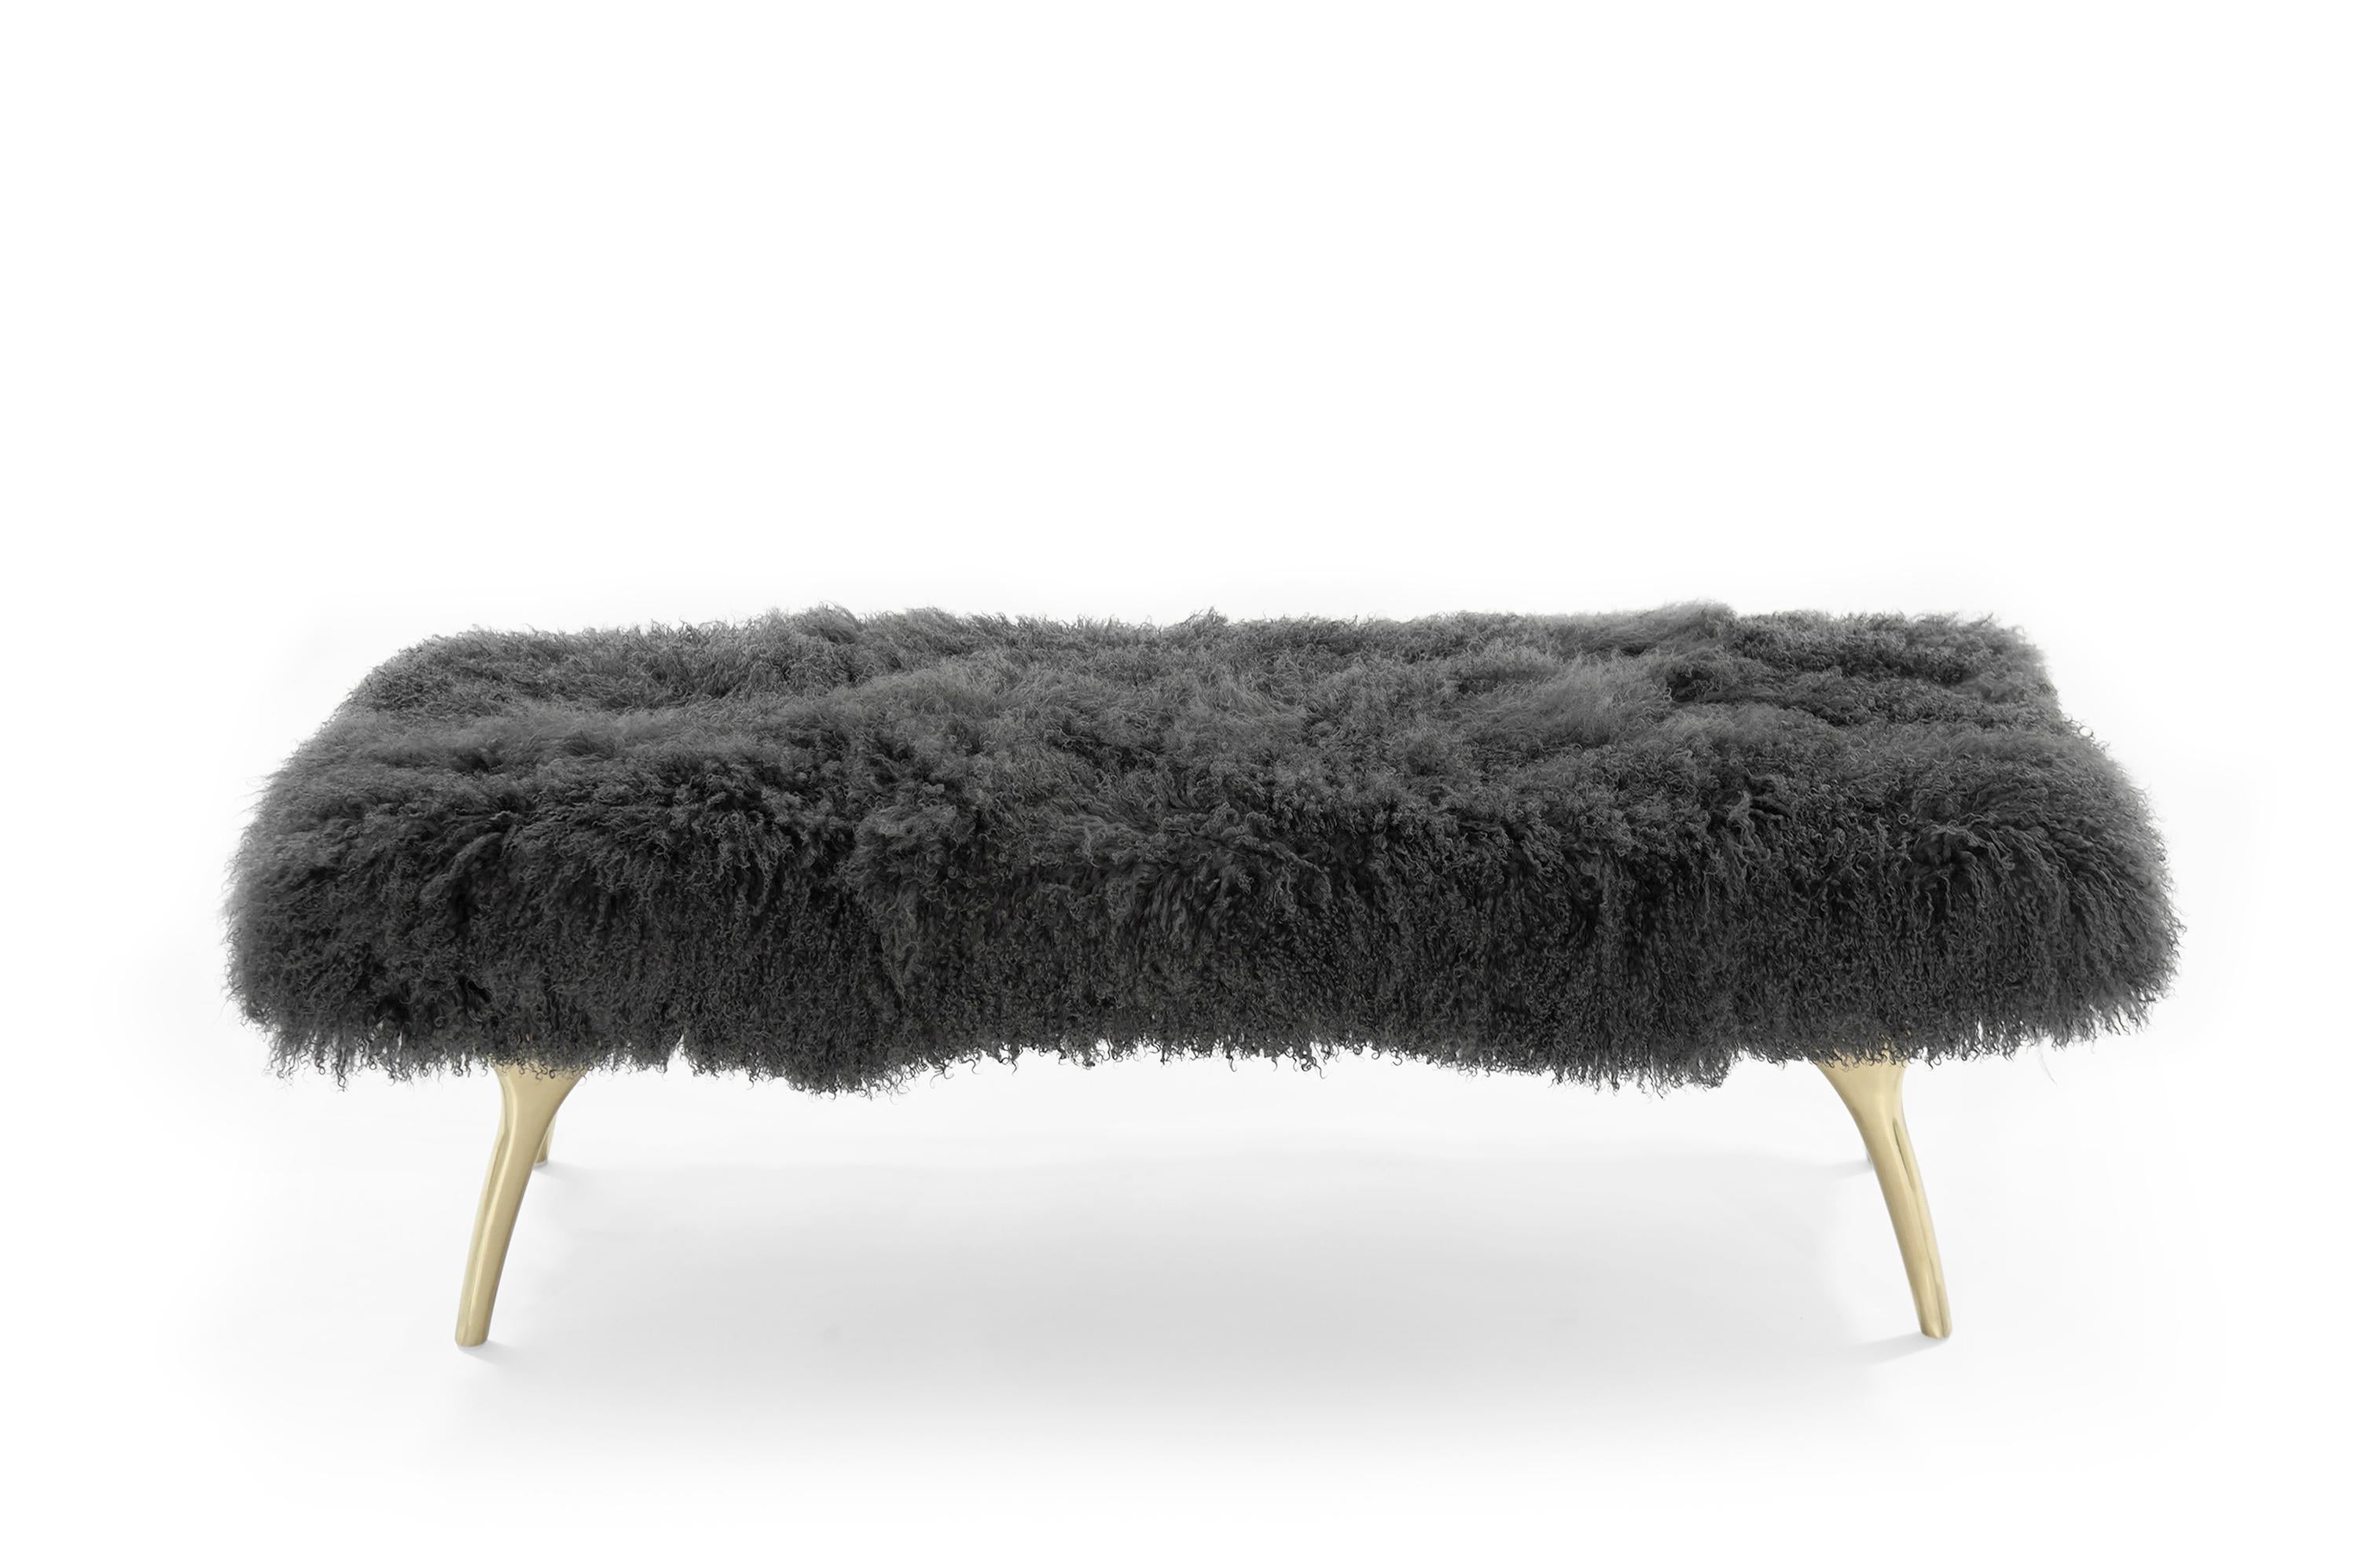 The Crescent Bench floats effortlessly, poised on brass fingertips. Inspired by 20th-century visionaries like Vladimir Kagan and Gio Ponti, this bench offers a unique perspective. The plush bench cushion is fully wrapped in charcoal Mongolian wool